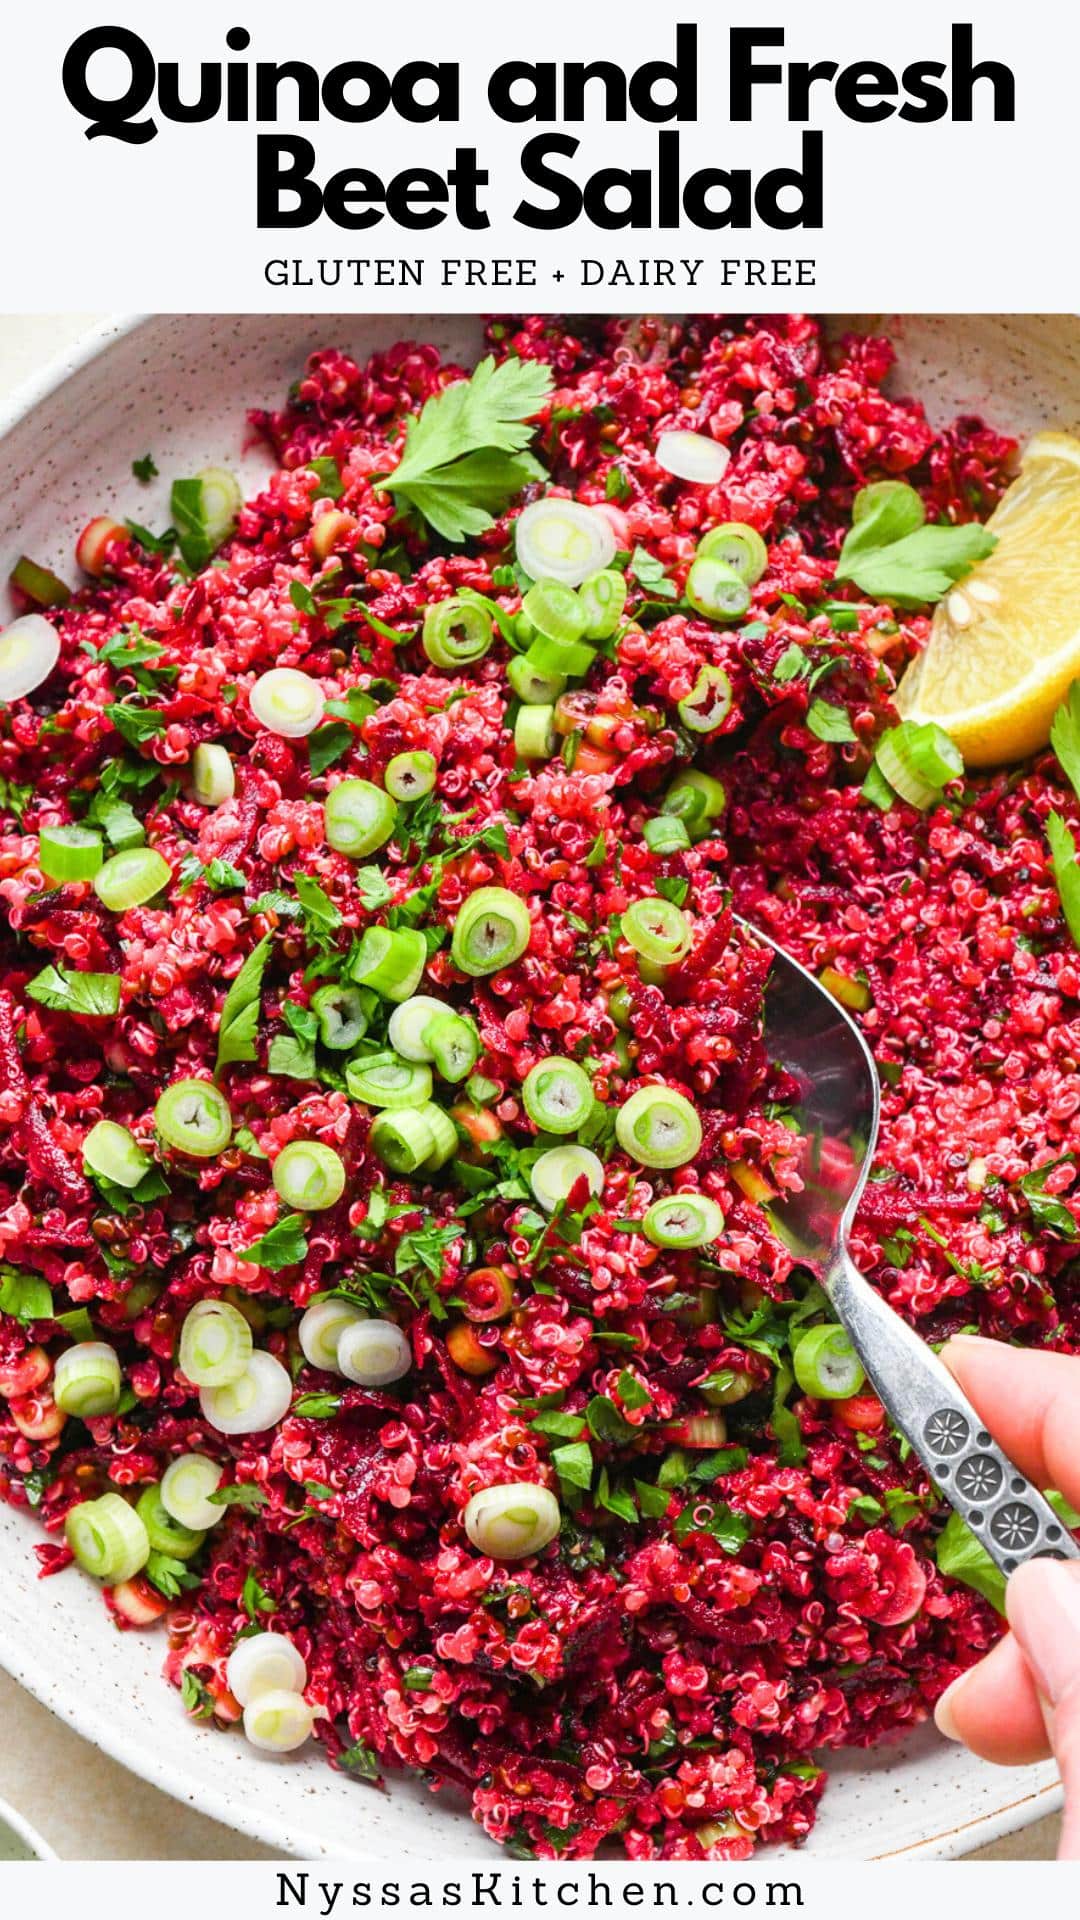 This quinoa and fresh beet salad is a bright and flavorful recipe that's as easy to make as it is pretty! Made with perfectly cooked, fluffy quinoa, raw shredded beets, fresh herbs, green onions, and a lemony dressing. It's the perfect healthy side dish or a great start to a complete meal if you add some cooked protein and maybe a few handfuls of fresh salad greens. In this post, I also cover my favorite method for making fool-proof quinoa! The recipe is gluten free, dairy free, and vegan / vegetarian!